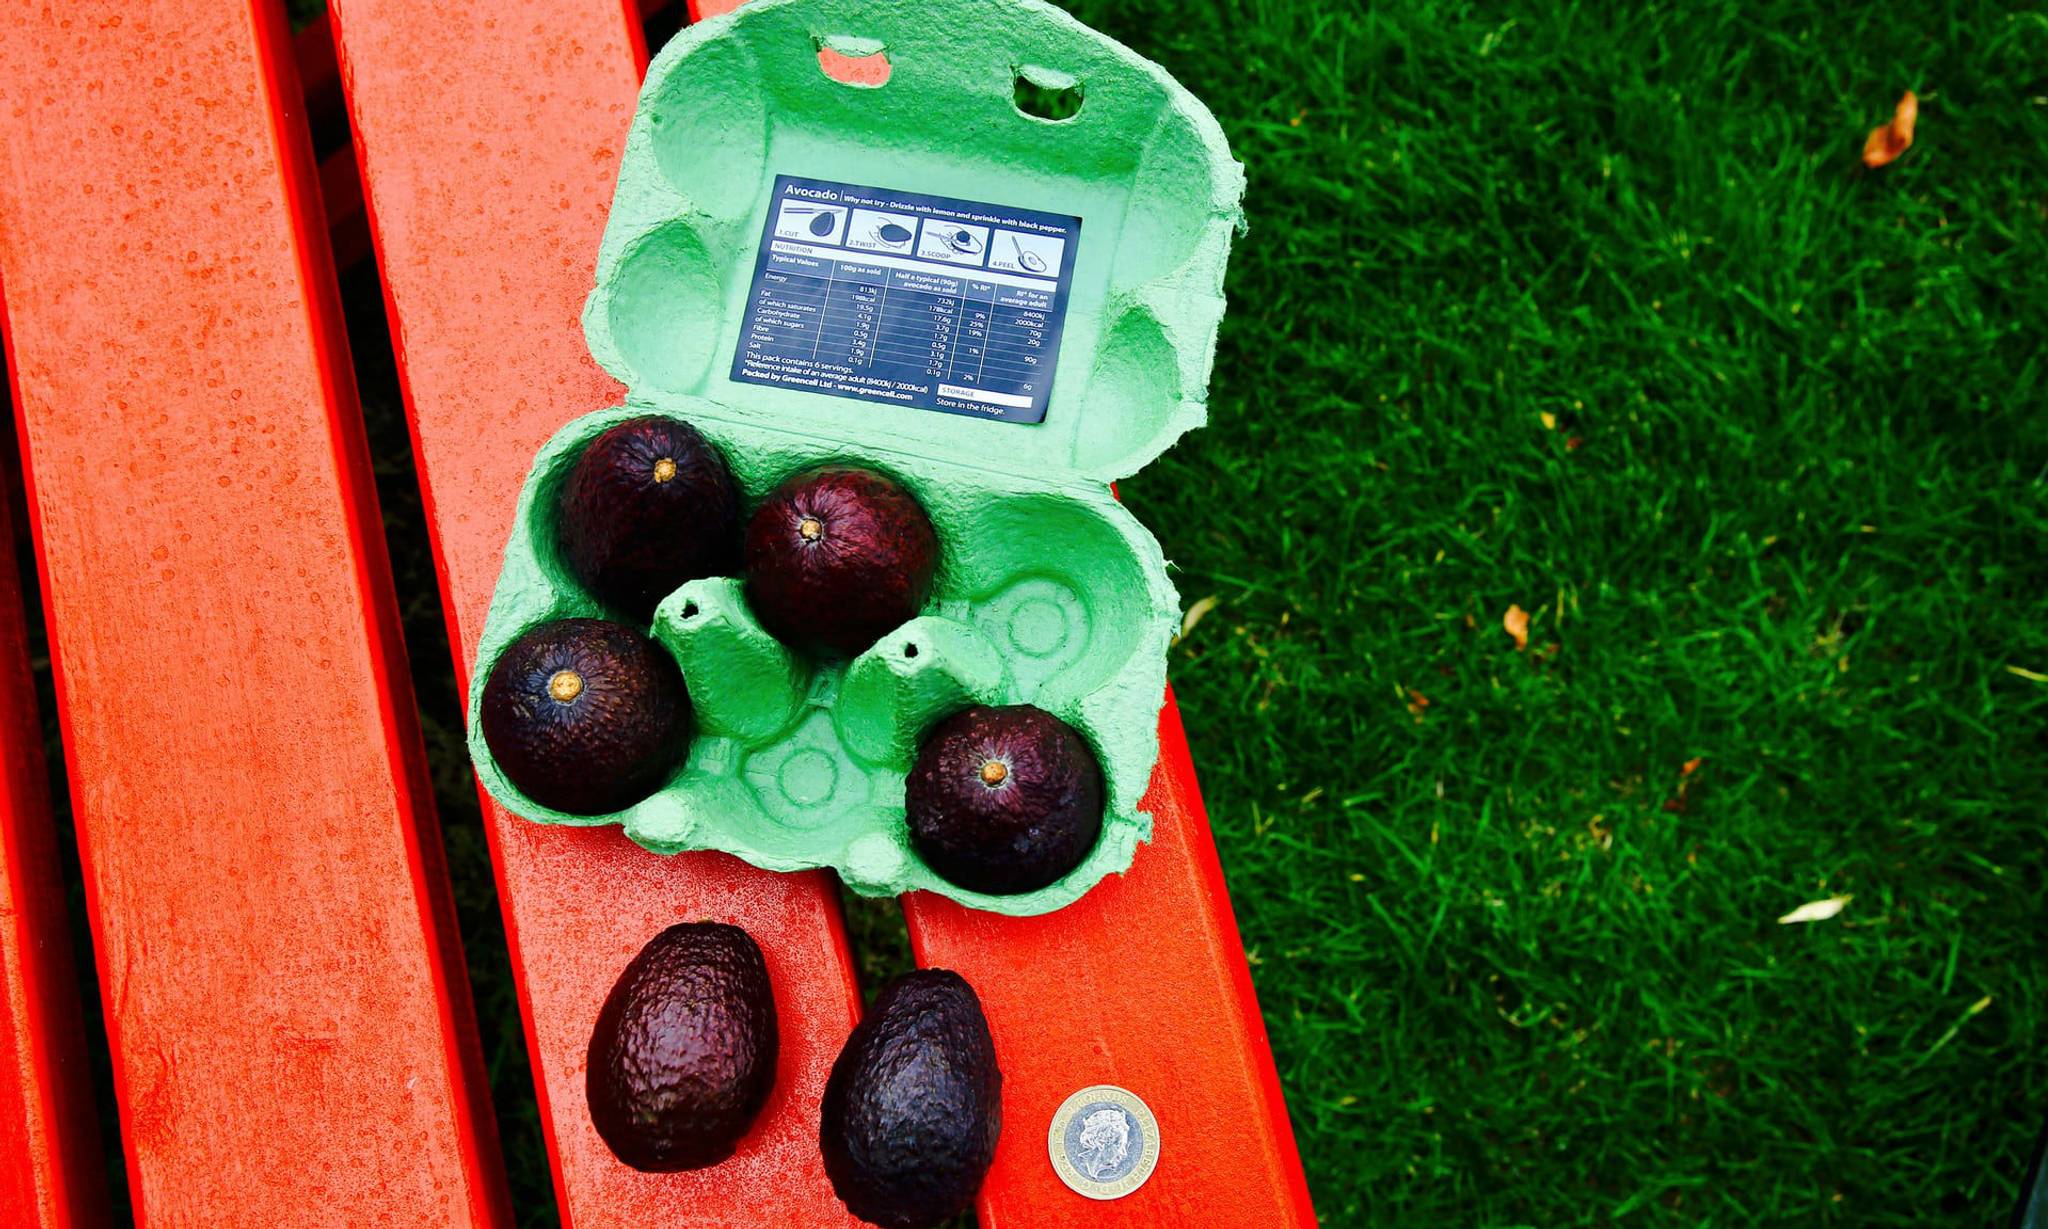 Tesco tiny avocados attempt to reduce food waste